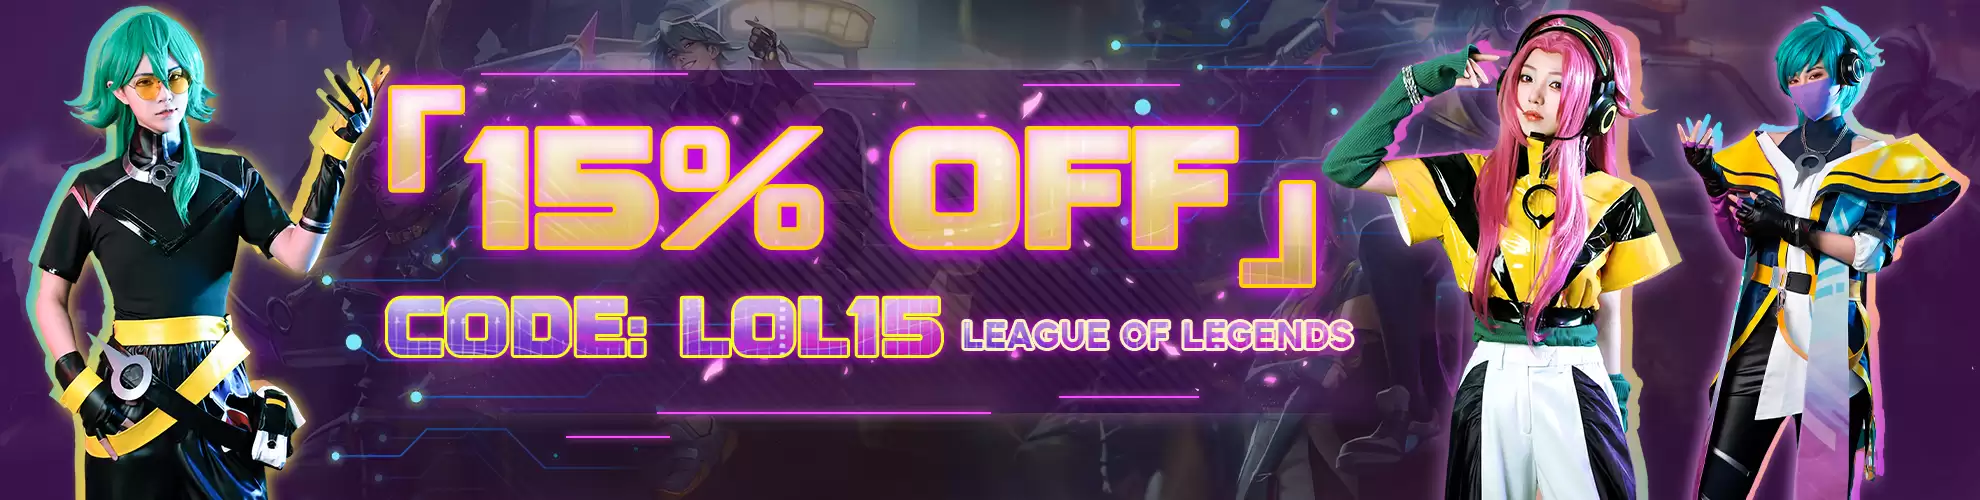 Get 15% Off With This Rolecosplay Discount Voucher